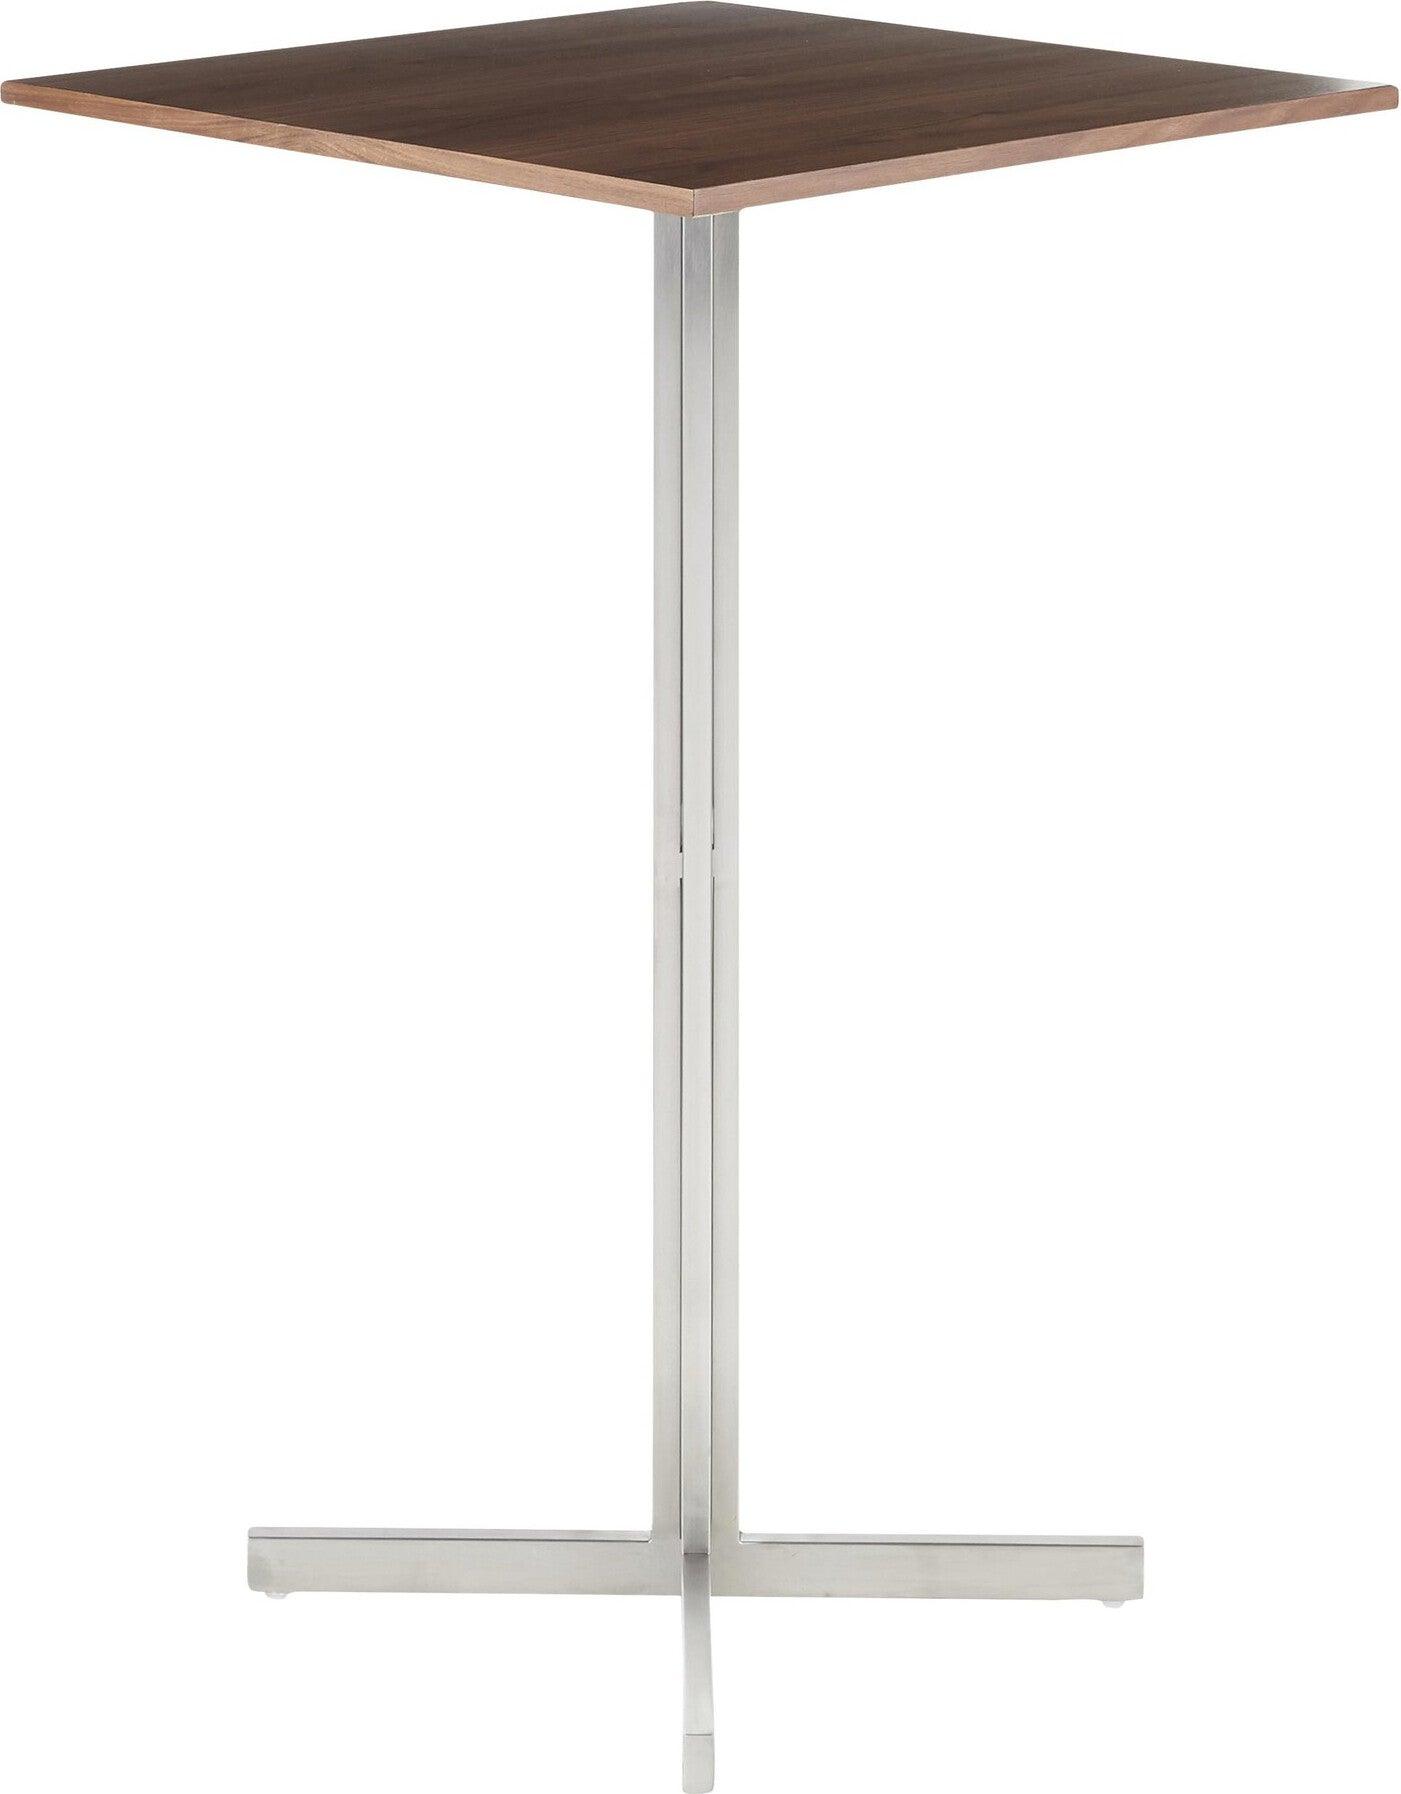 Lumisource Bar Tables - Fuji Contemporary Square Bar Table in Stainless Steel with Walnut Wood Top